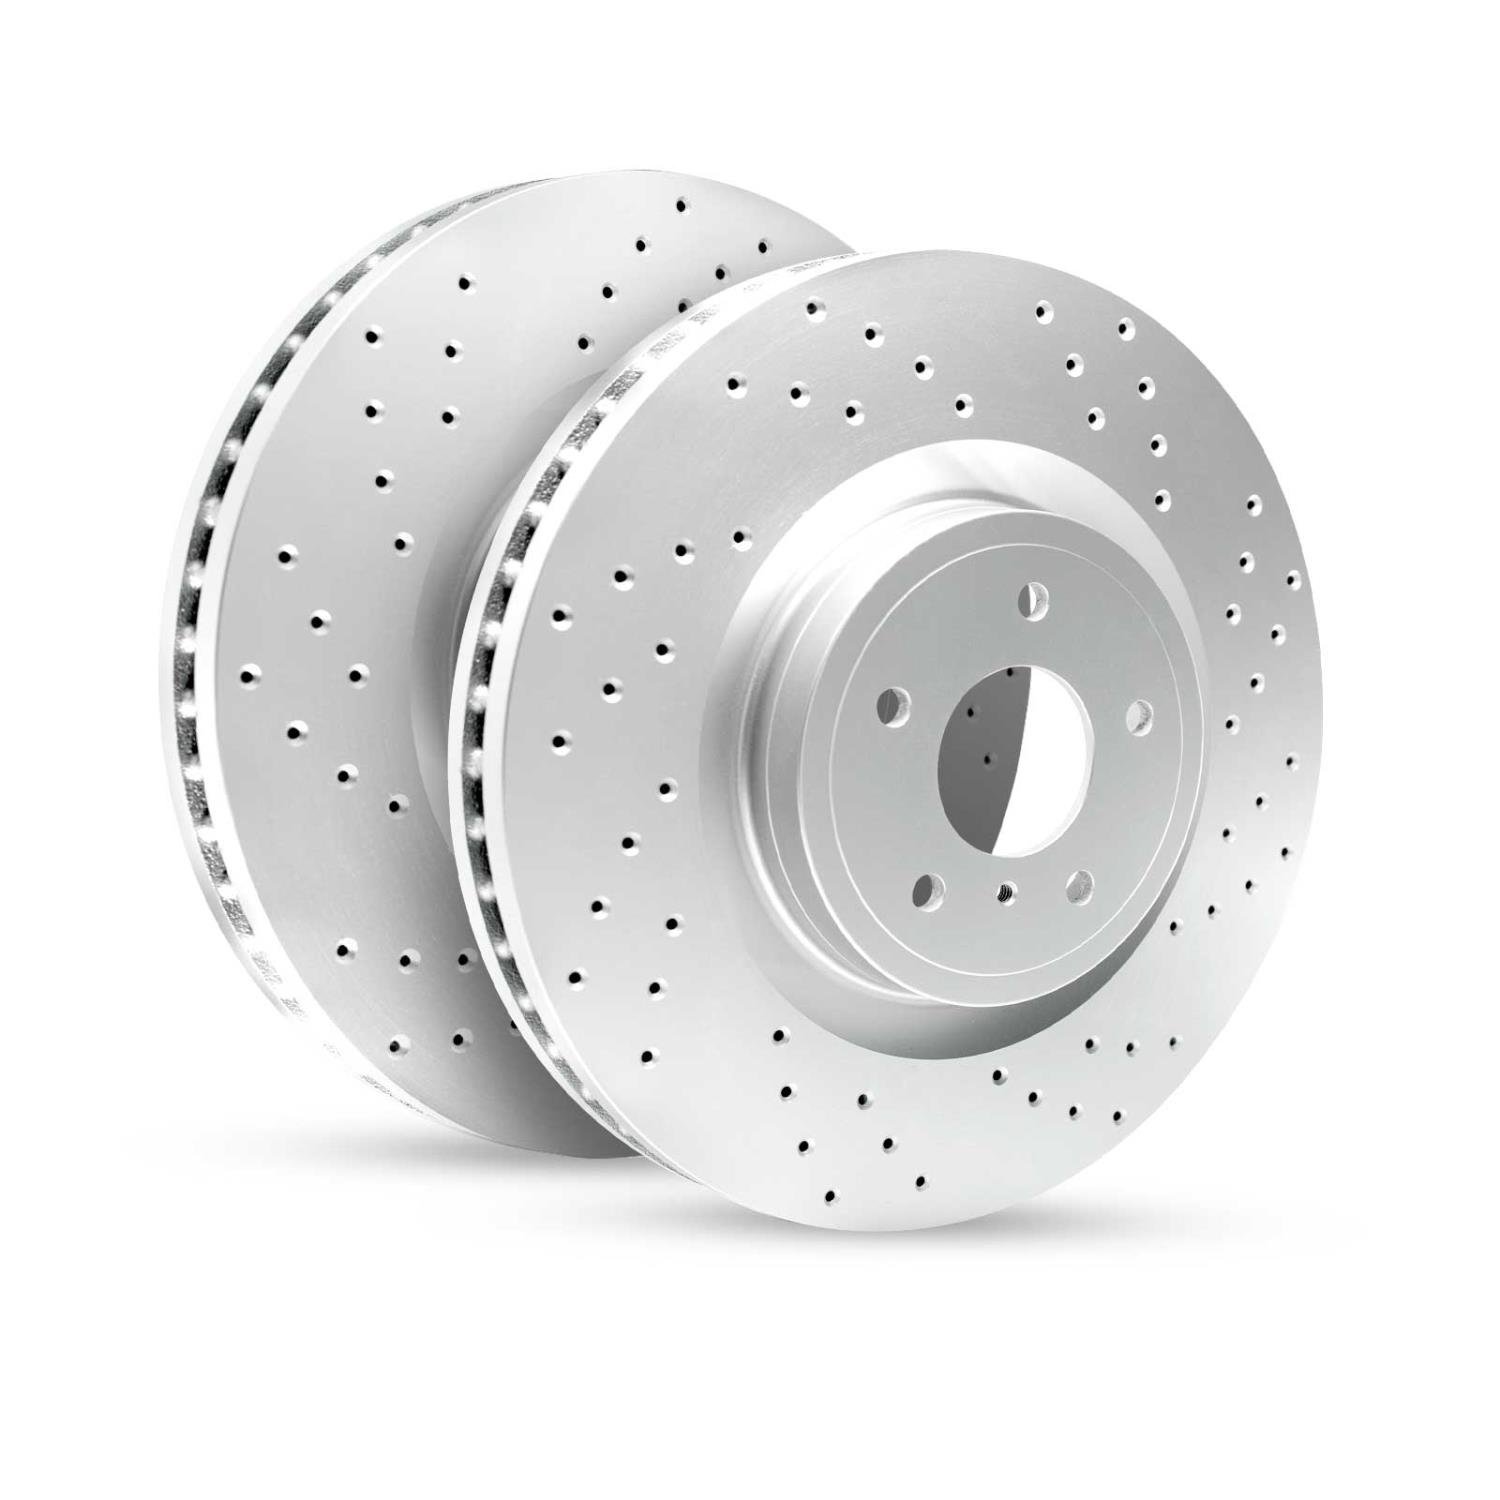 GEO-Carbon Drilled/Slotted Rotors, 1995-2004 Lexus/Toyota/Scion,